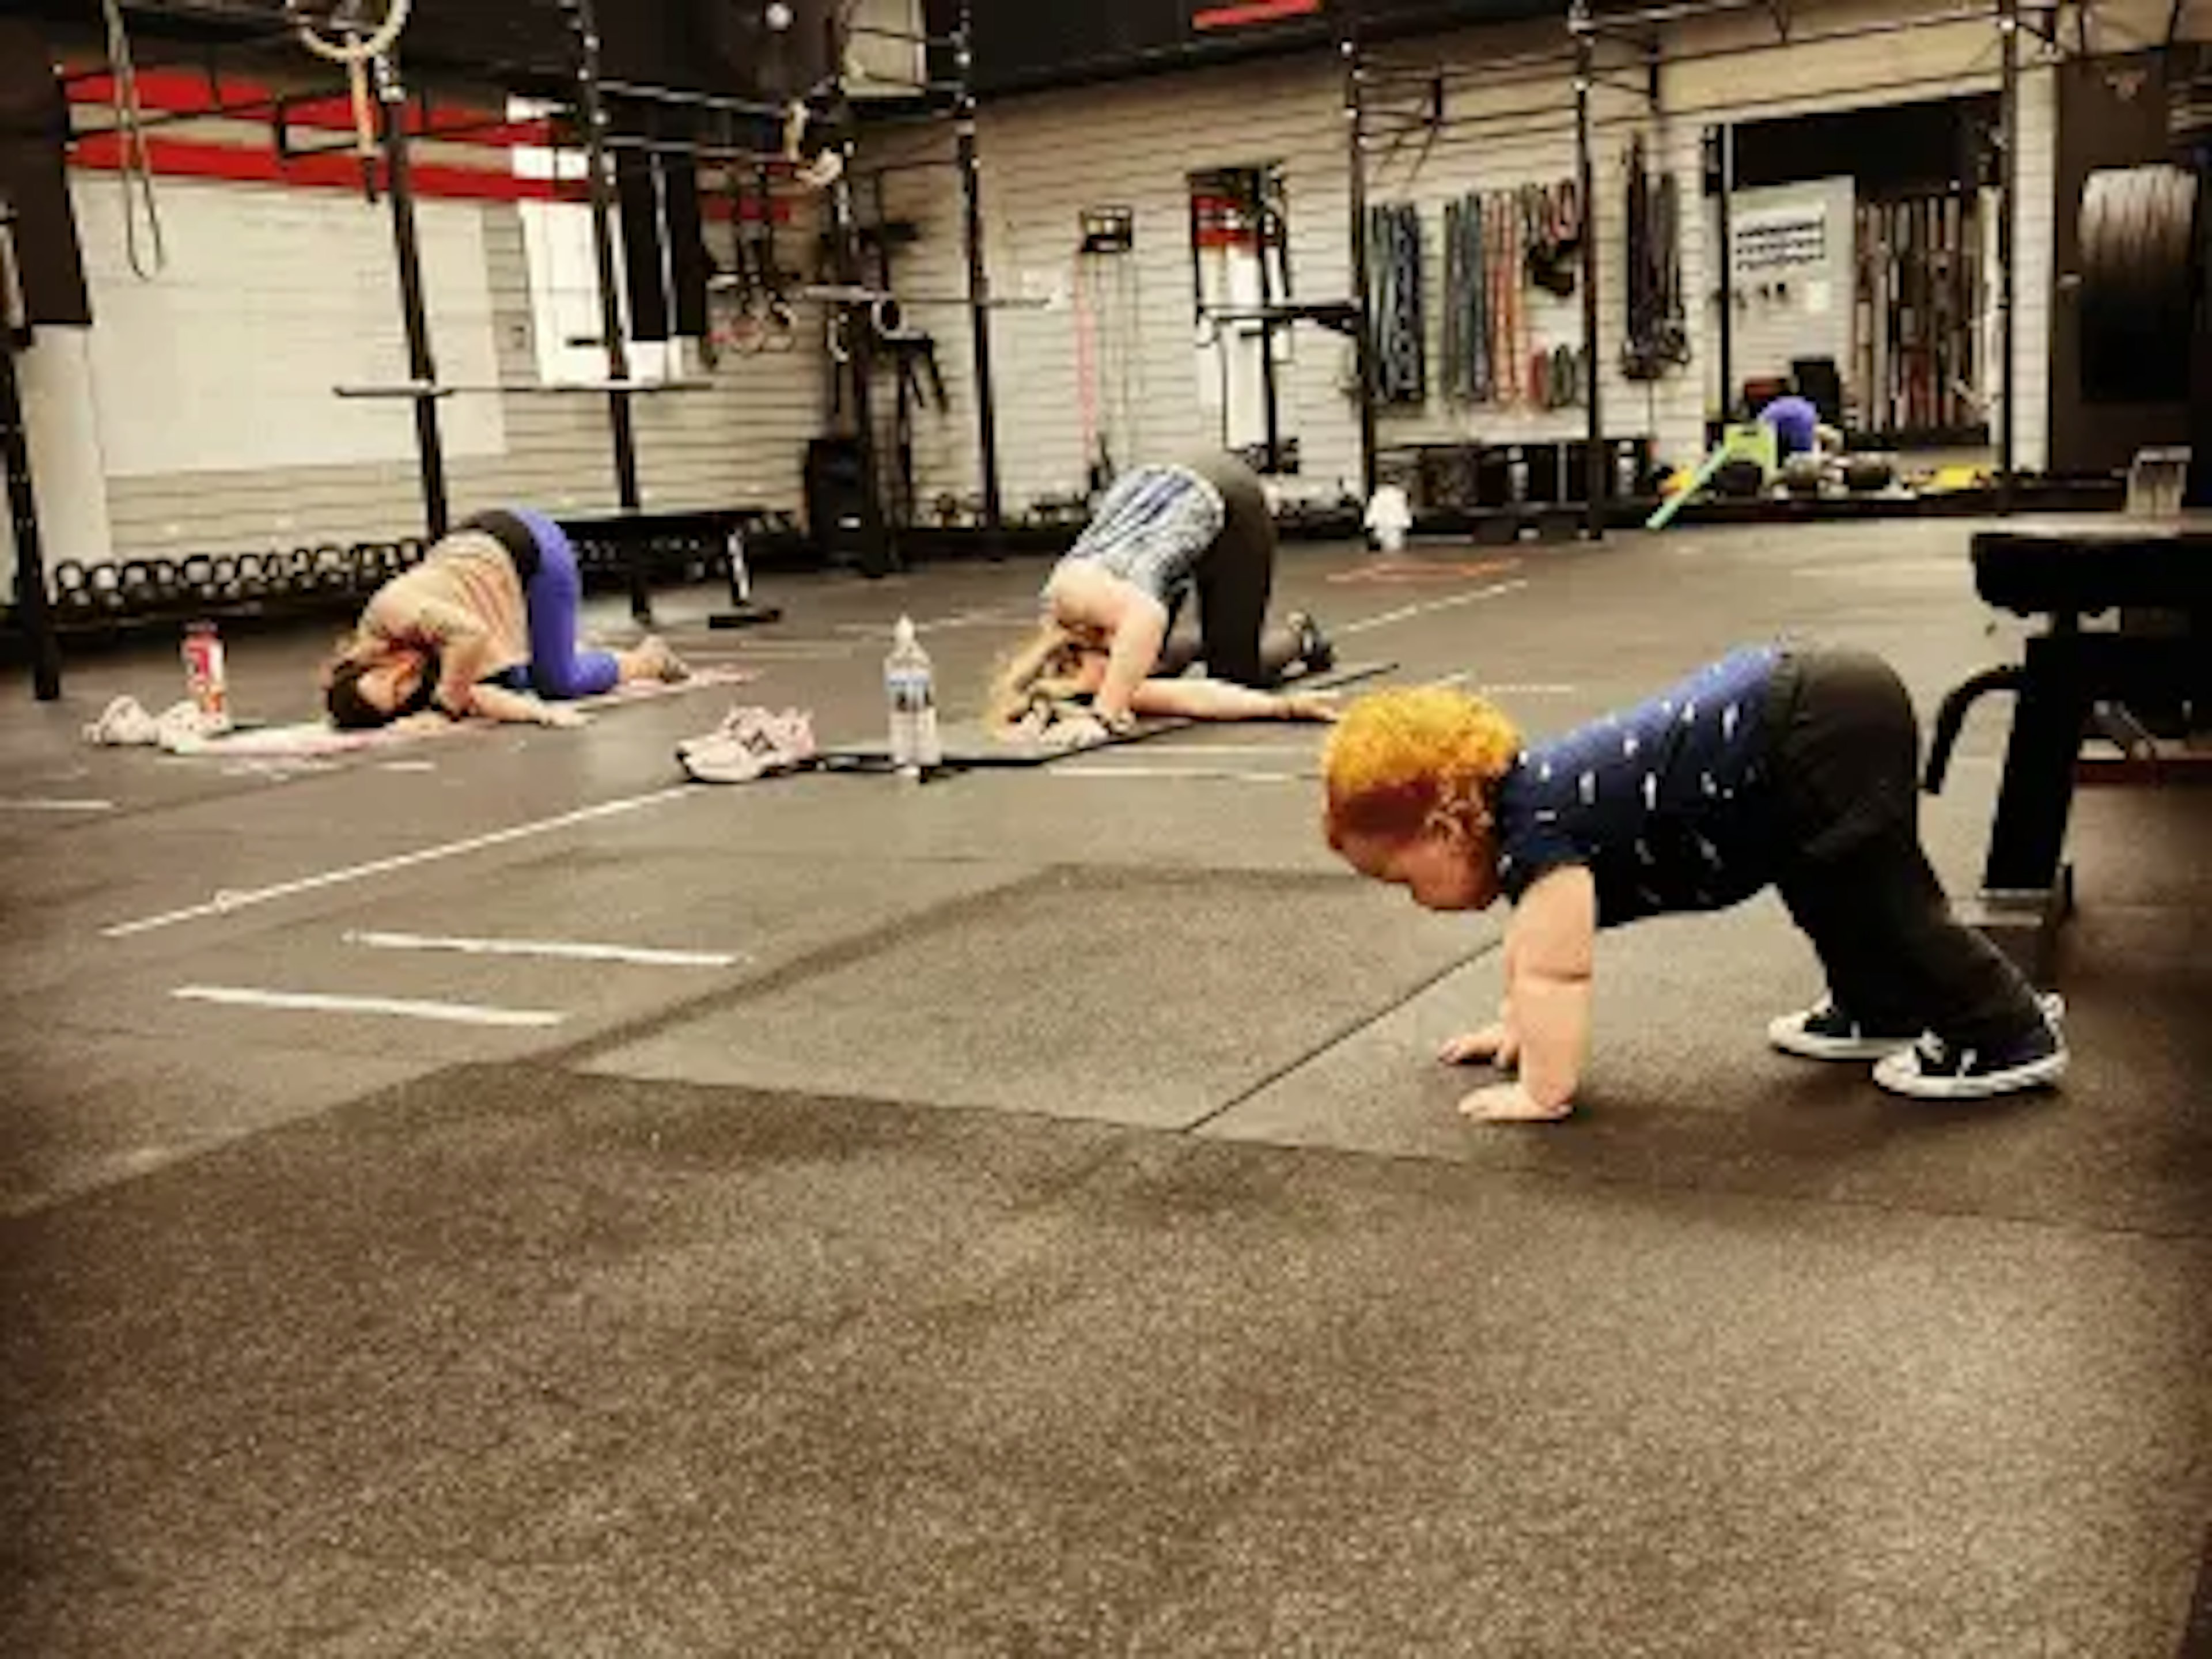 A baby practicing a gym exercise with other members of the gym.